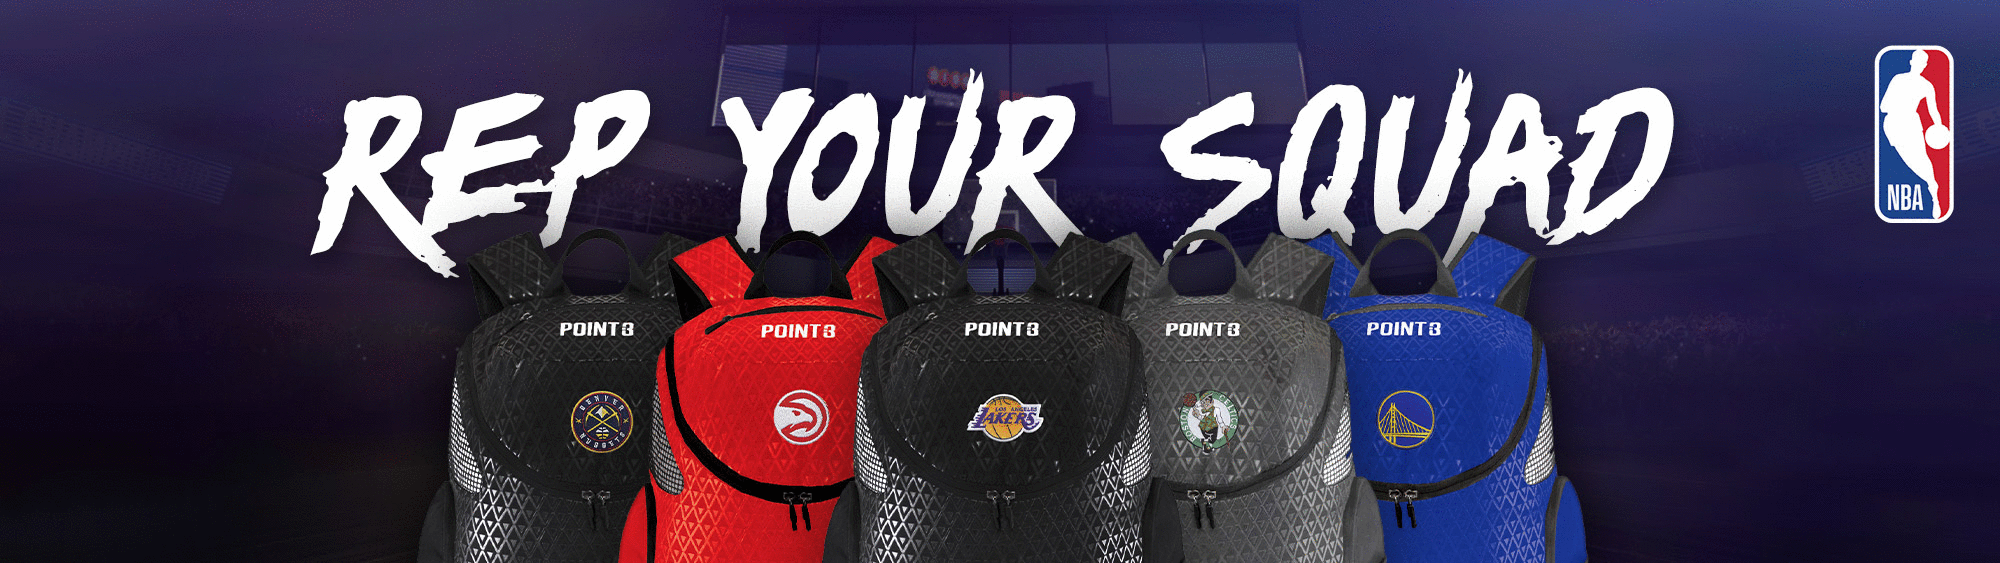 NBA BACKPACK COLLECTION